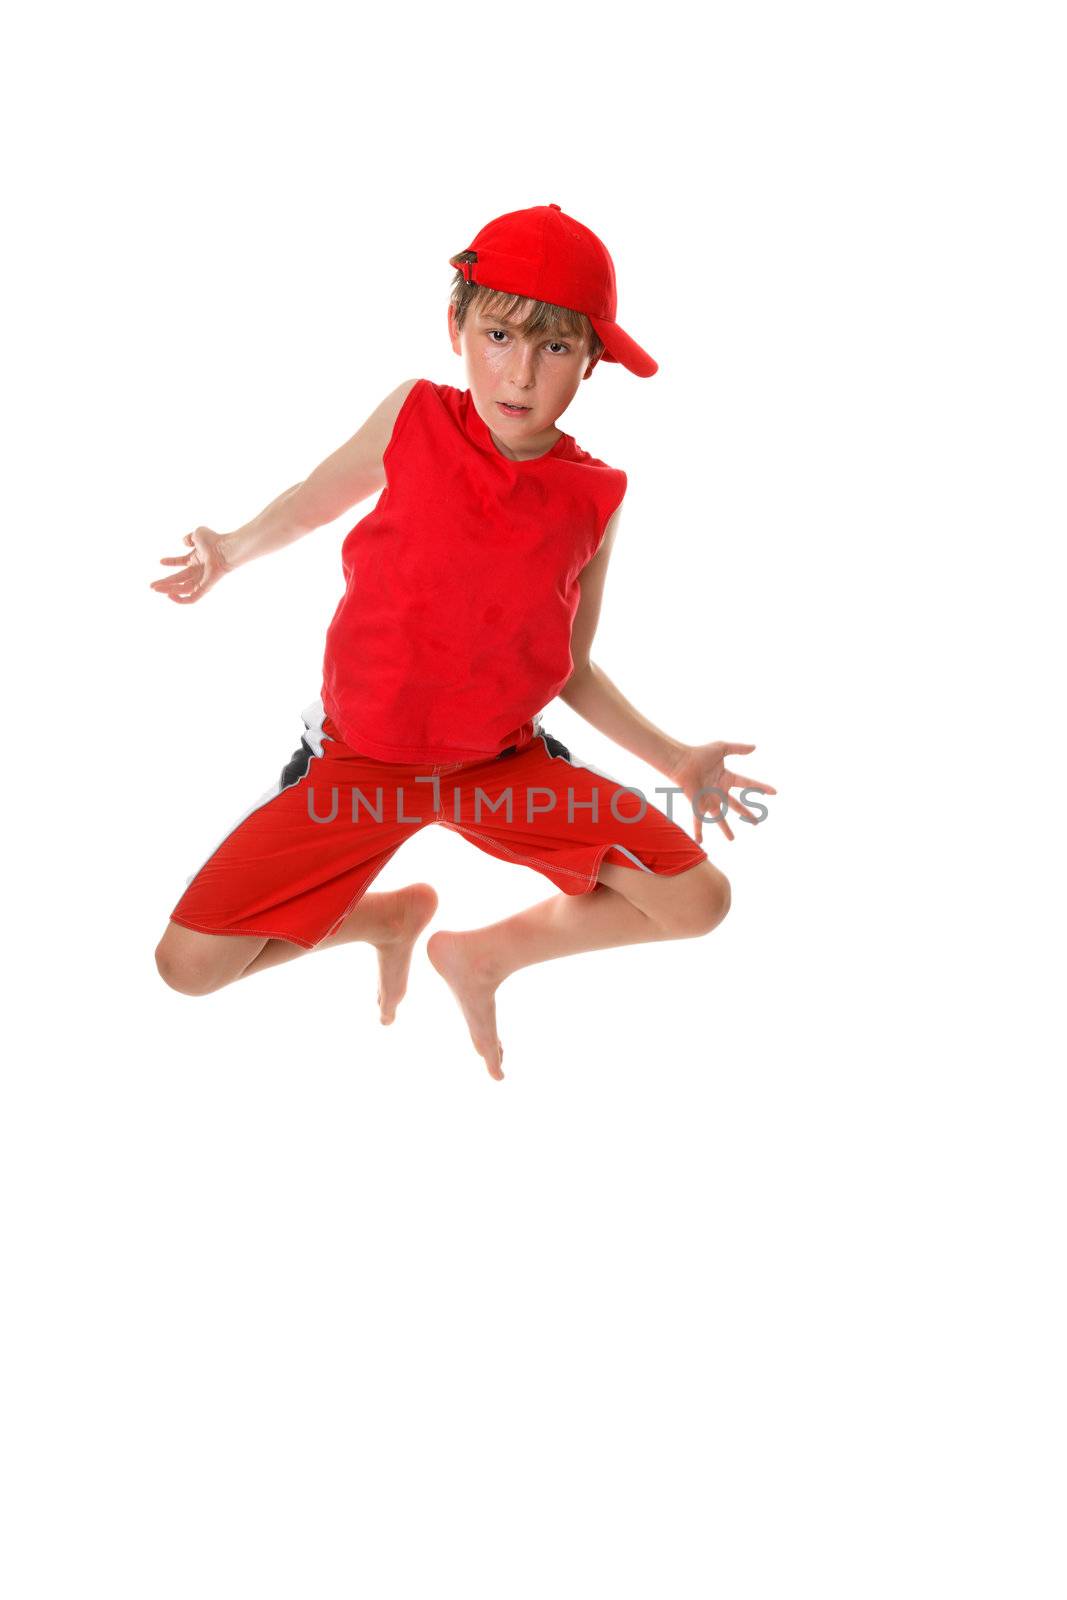 A barefoot casual boy in mid jump